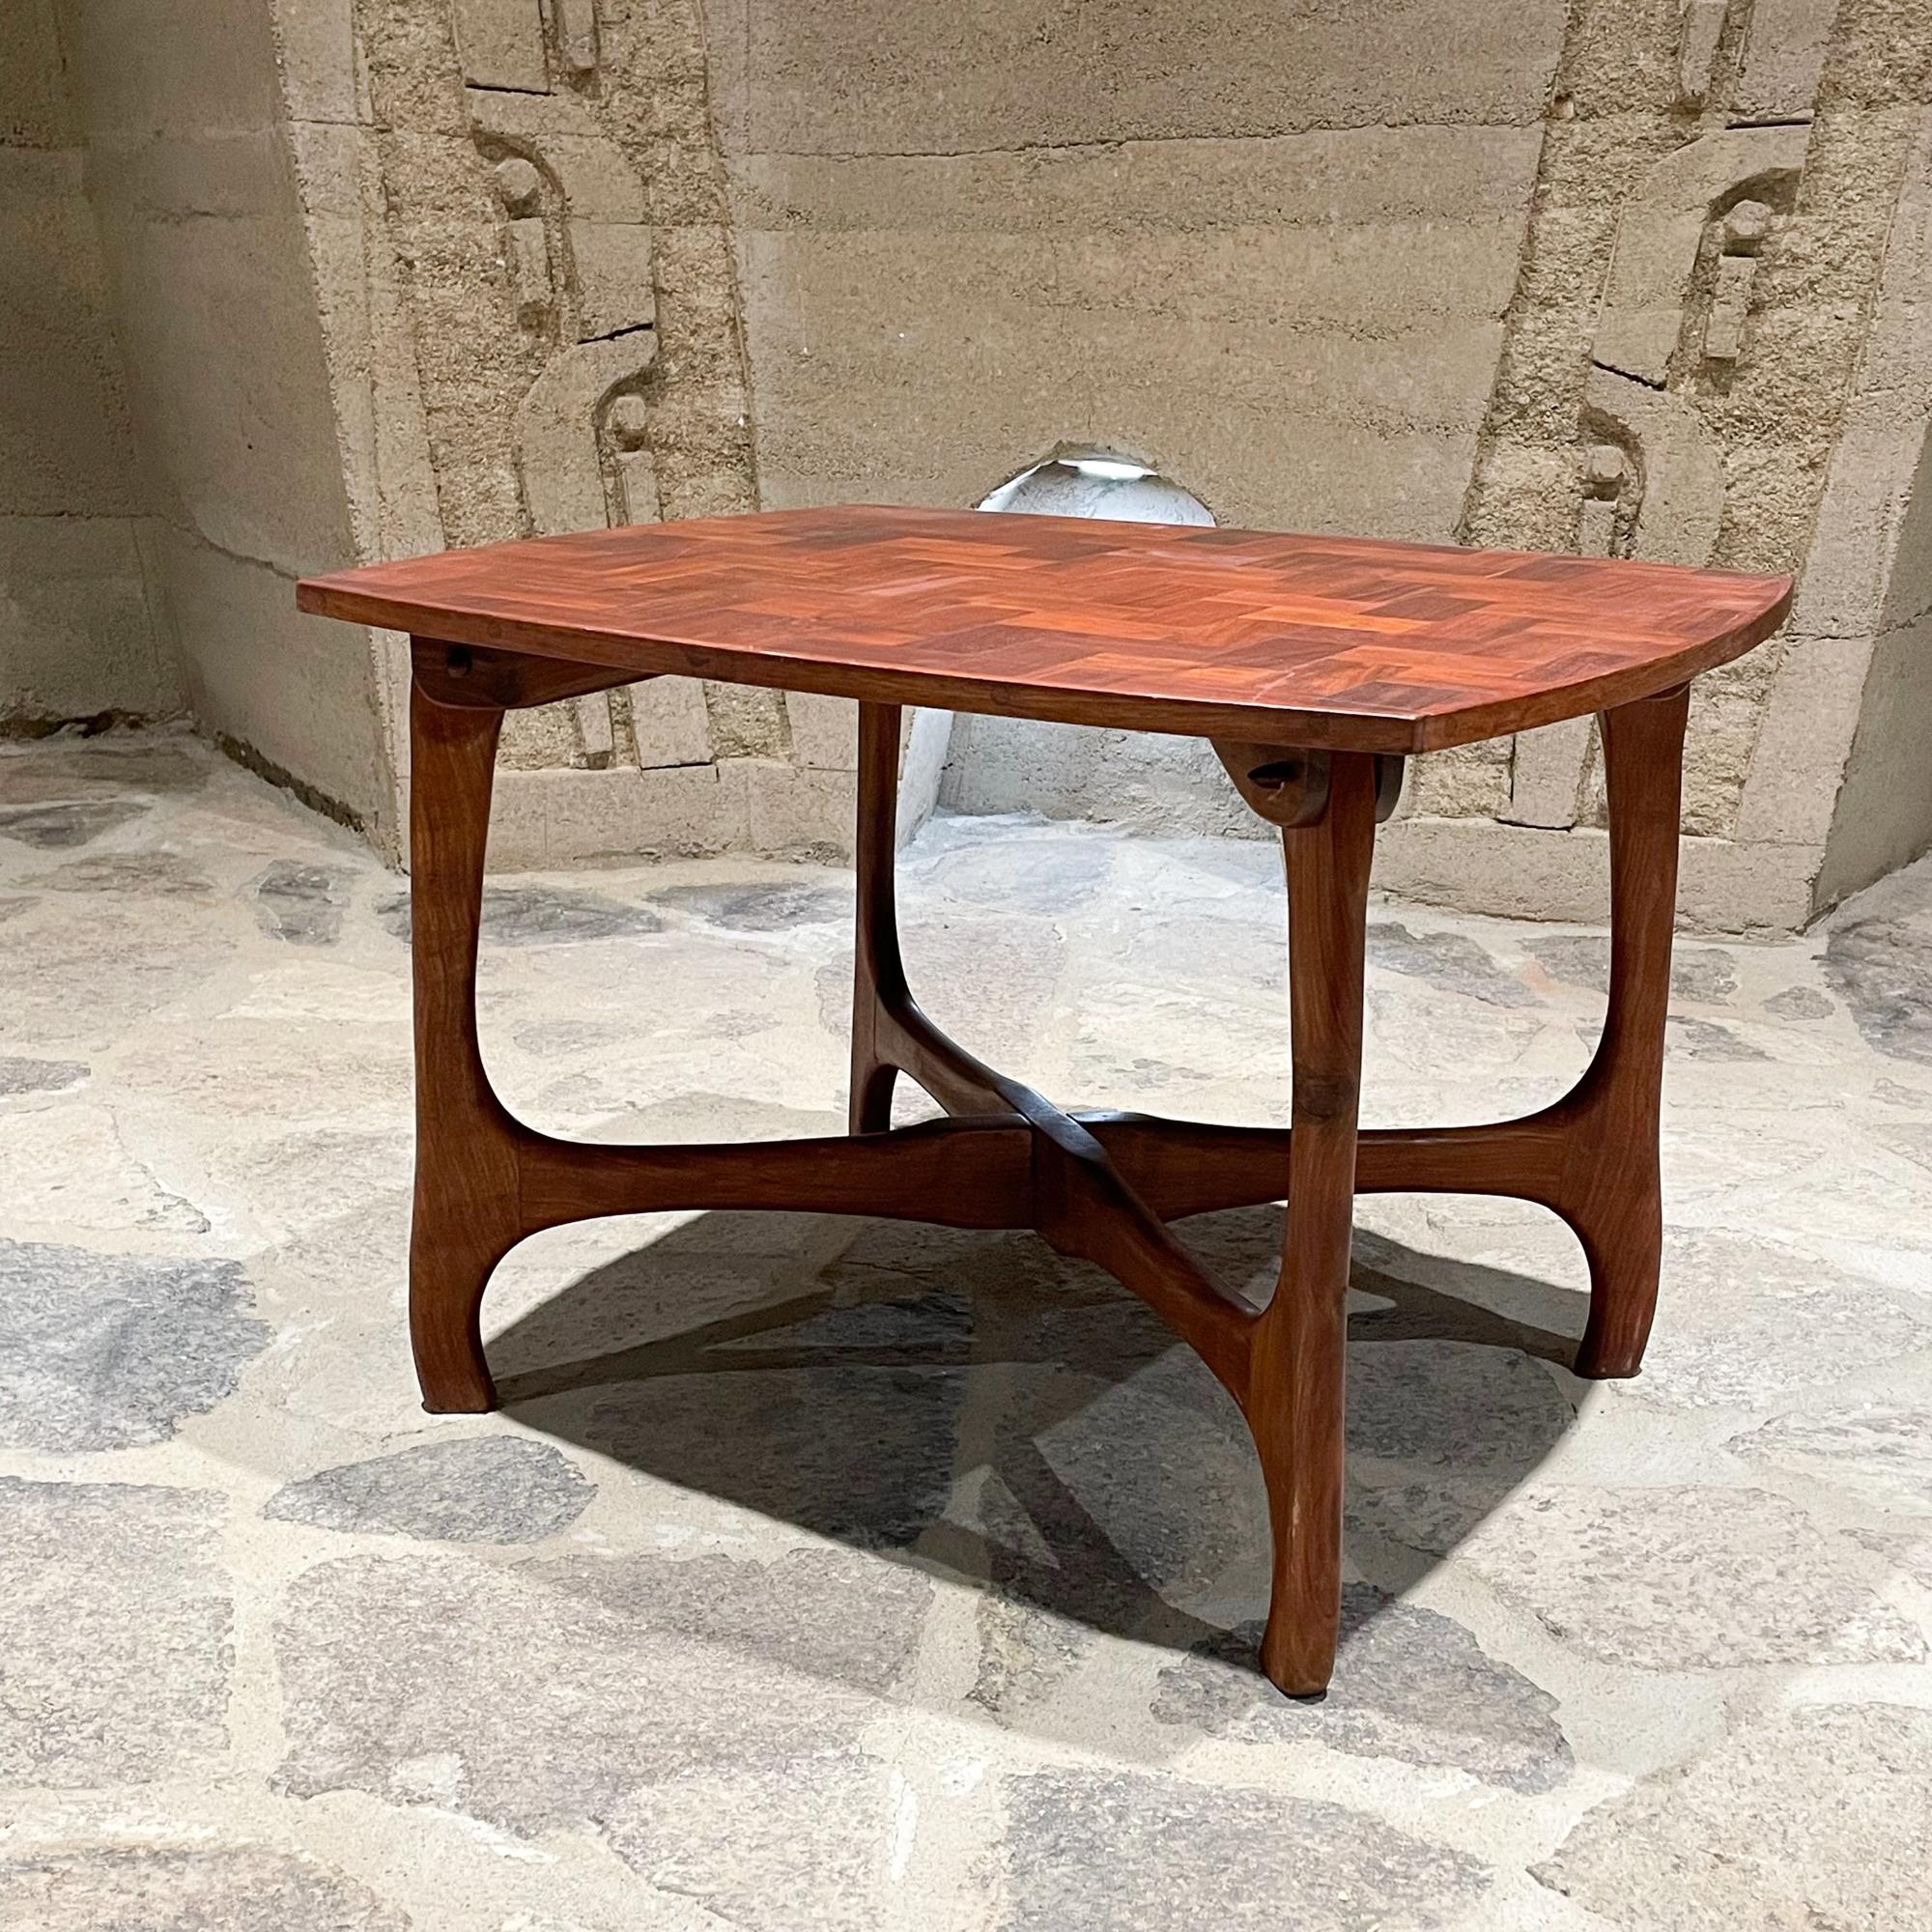 Exotic Cocobolo Table
Side Table crafted by Señal: Designer DON SHOEMAKER made in Cocobolo Wood Marquetry. Handcrafted in Michoacan Mexico 1950s
Don Shoemaker furnishings are highly collectible-using simple modern lines without a lot of